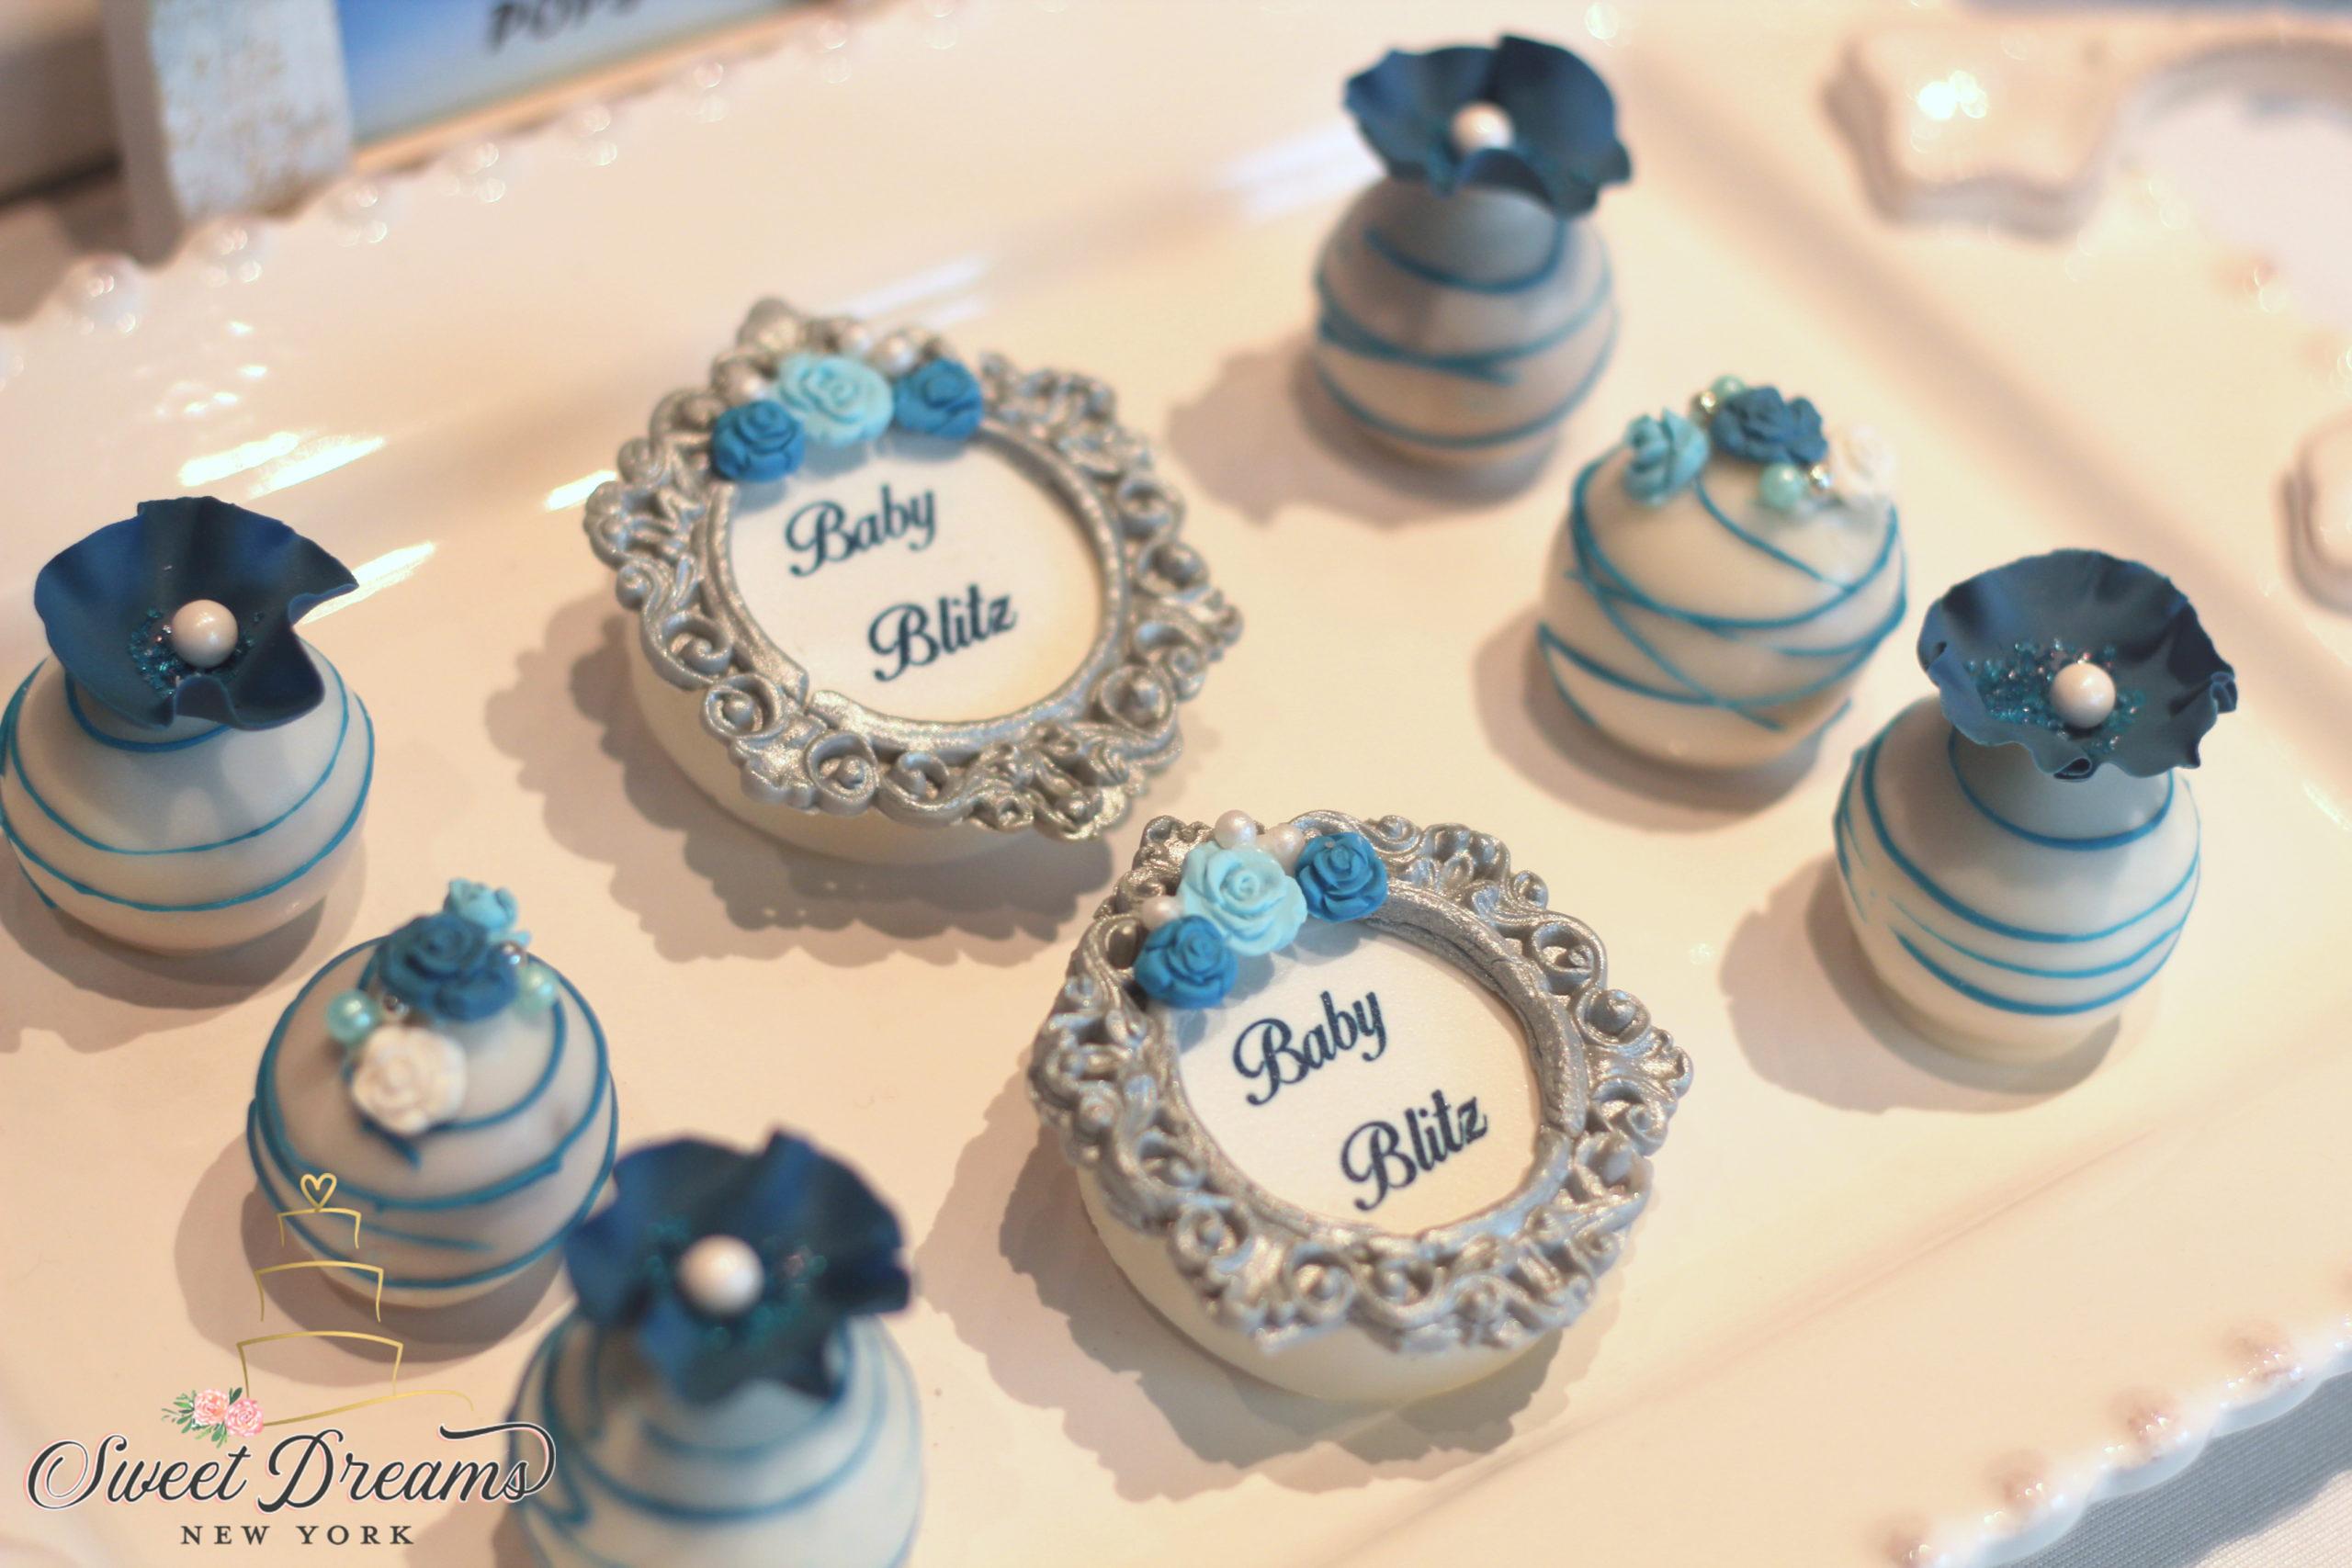 Tea party custom cookies for baby shower bridal shower desserts baby boy Long Island NYC Sweet Dreams NY